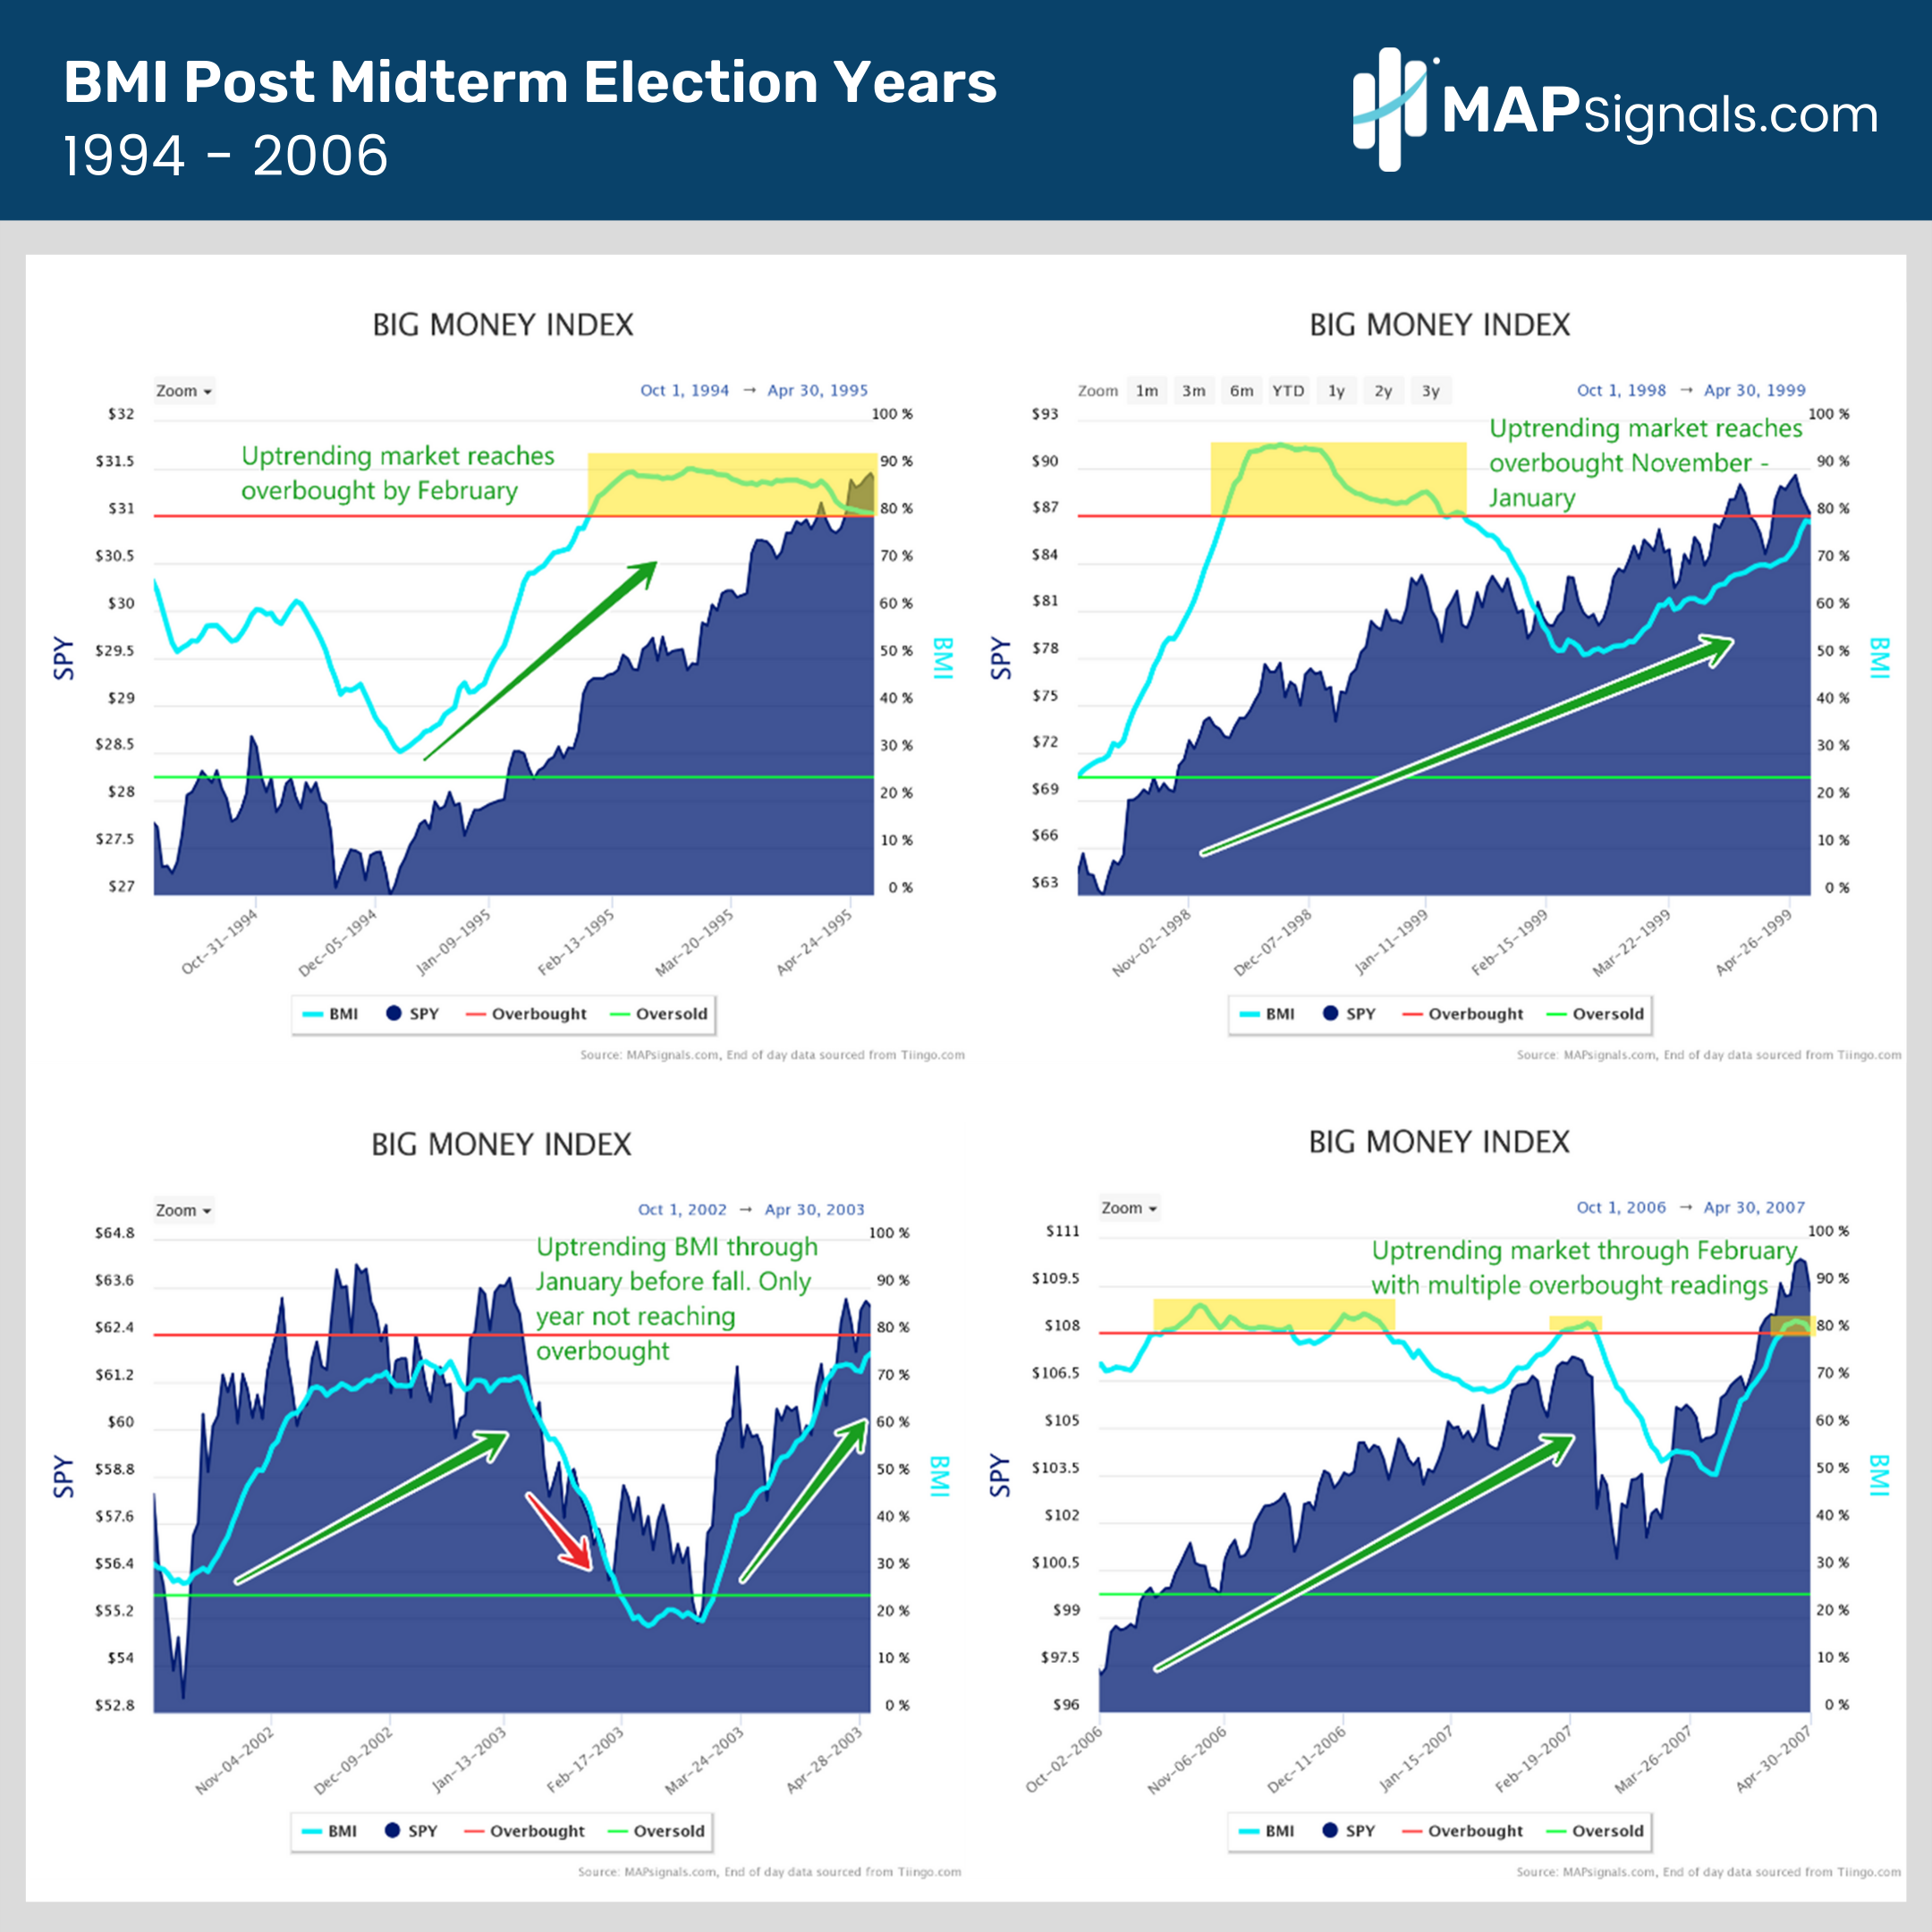 BMI Post Midterm Election Years 1994 - 2006 | MAPsignals